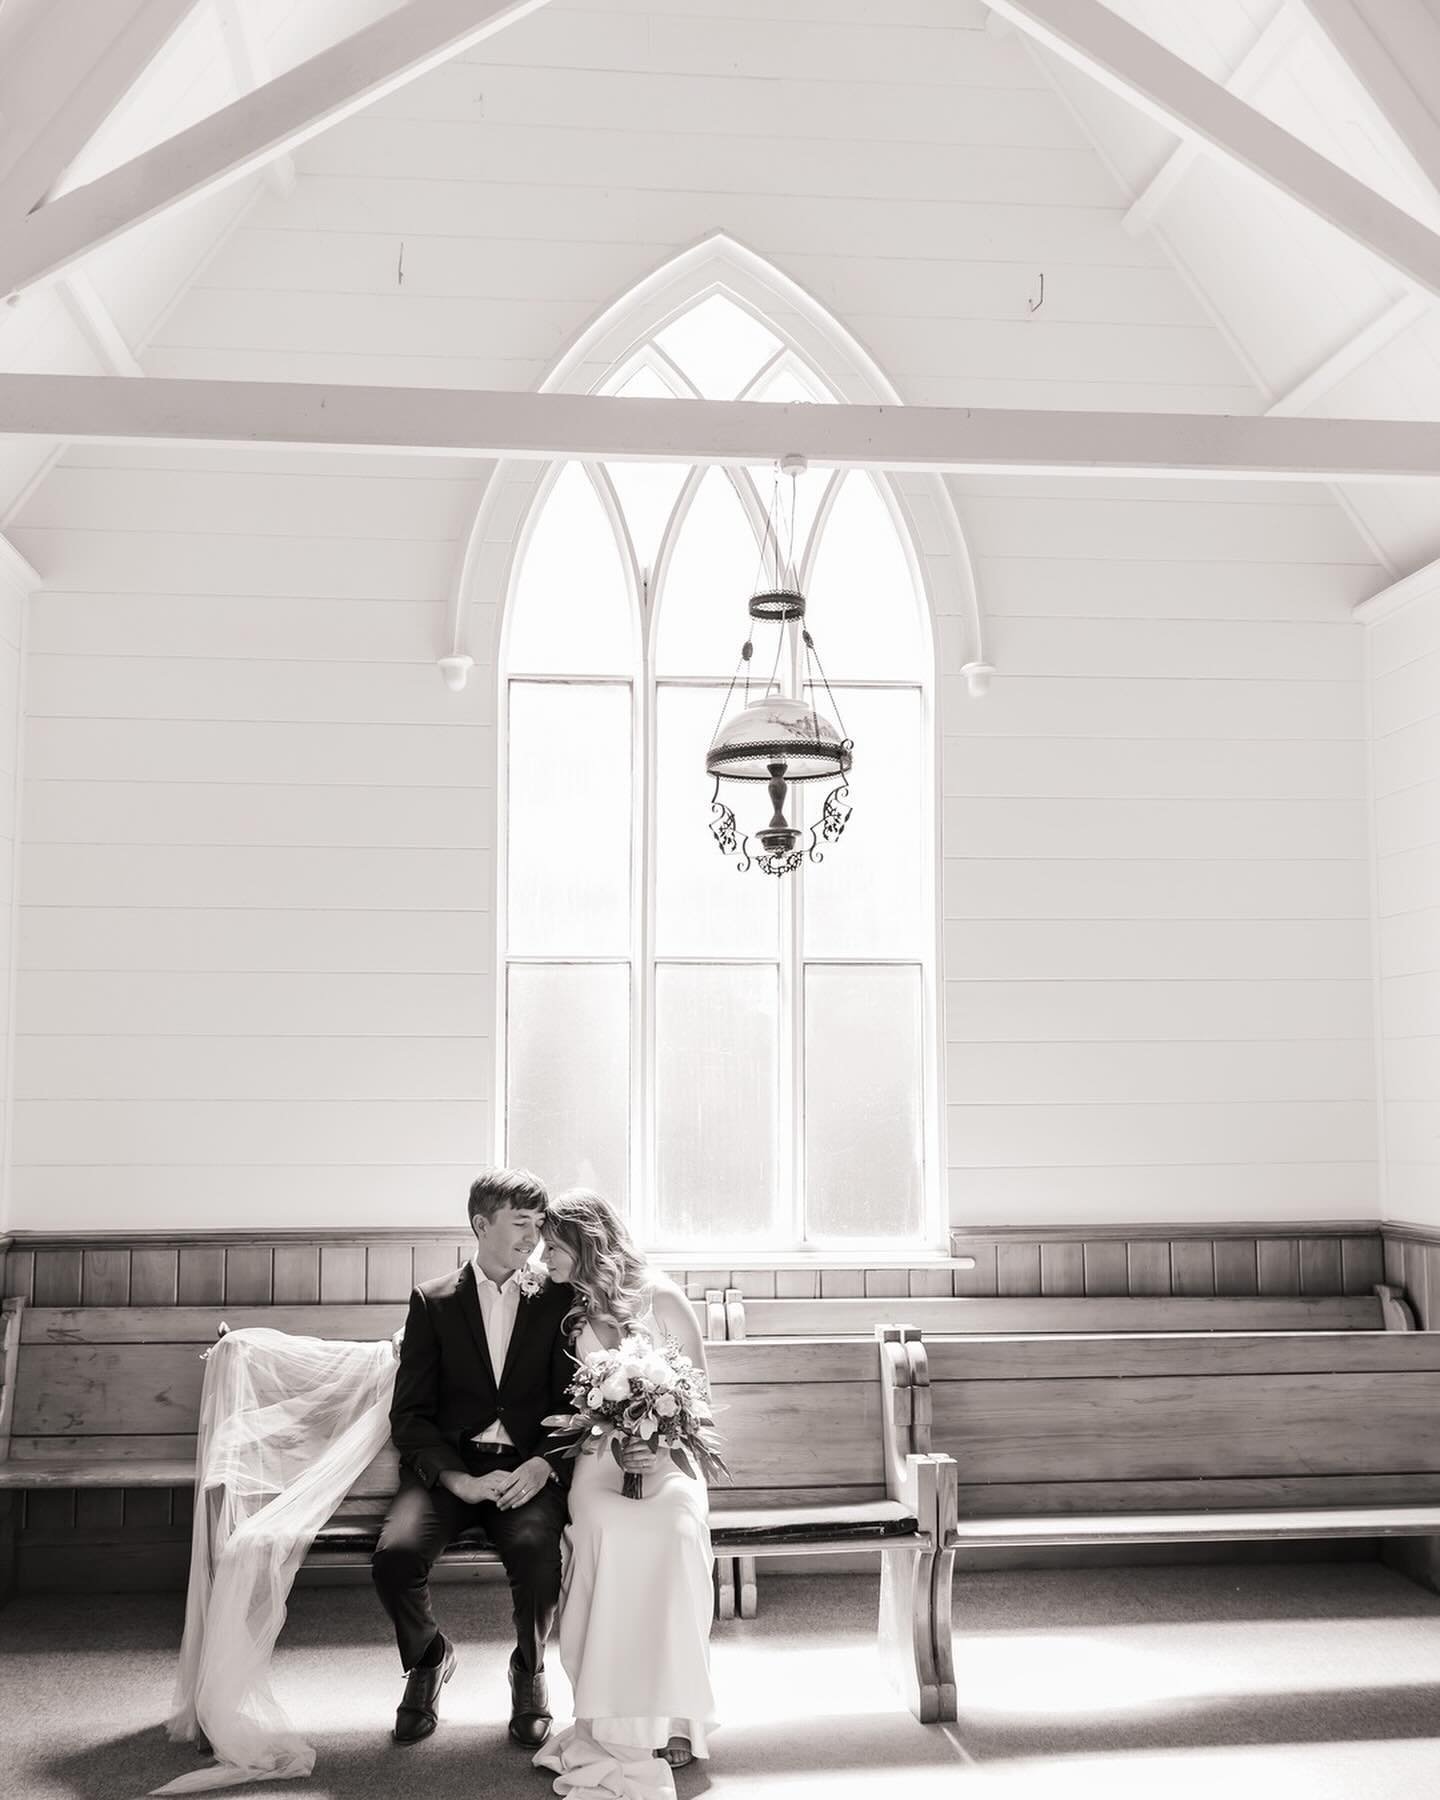 The Andersons got married in St Andrews Church in Matakana country park. A beautiful historical wedding venue - I was lucky enough to attend a wedding here a few years back. It is gorgeous and full or character!
⠀⠀⠀⠀⠀⠀⠀⠀⠀
Photos @annahartphotography
